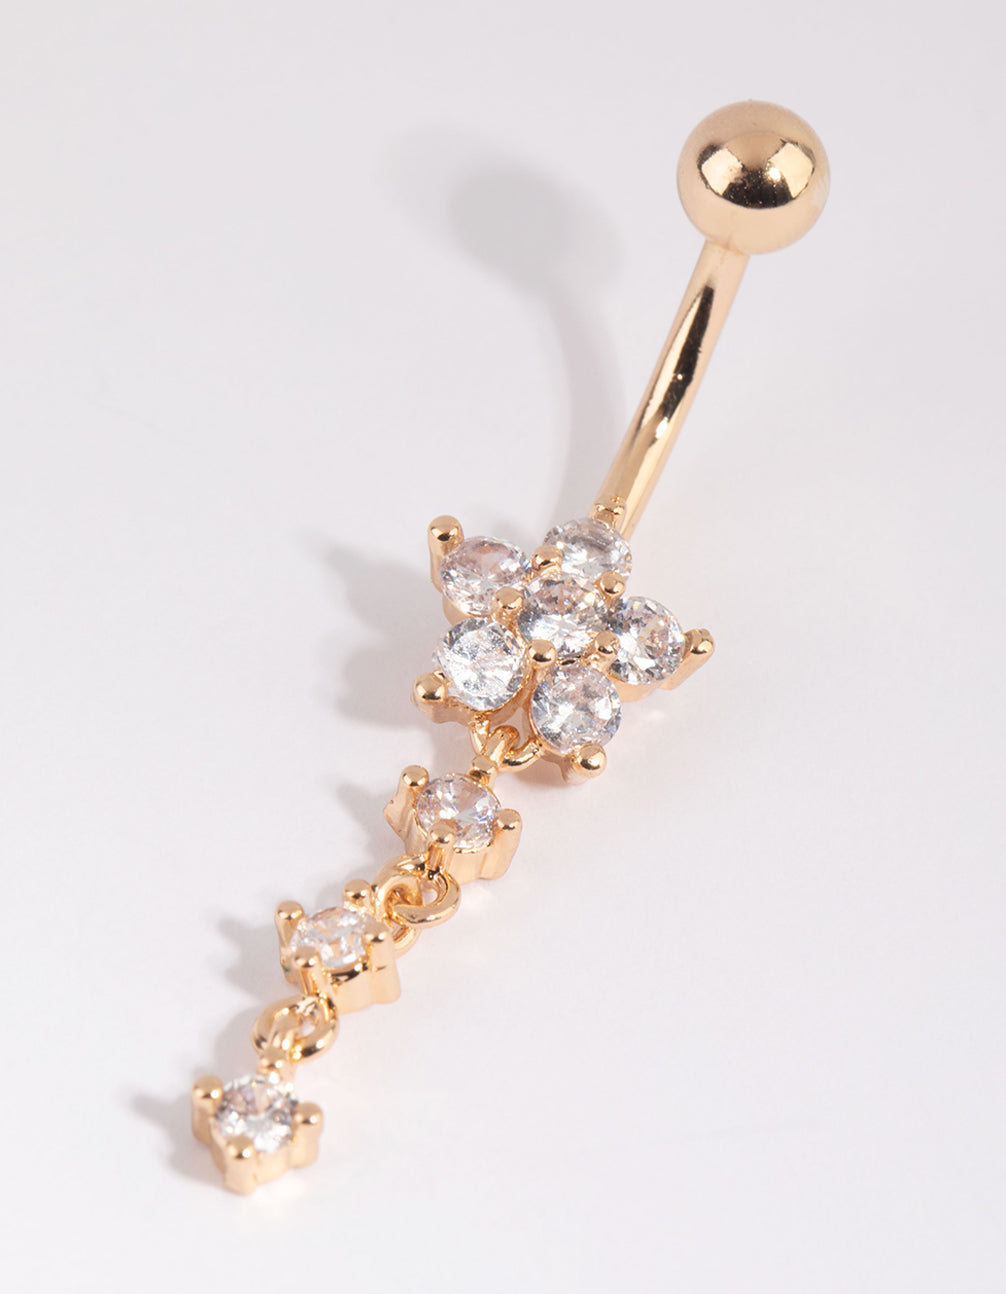 14K Gold Star Shaped Jeweled Dangling Belly Ring